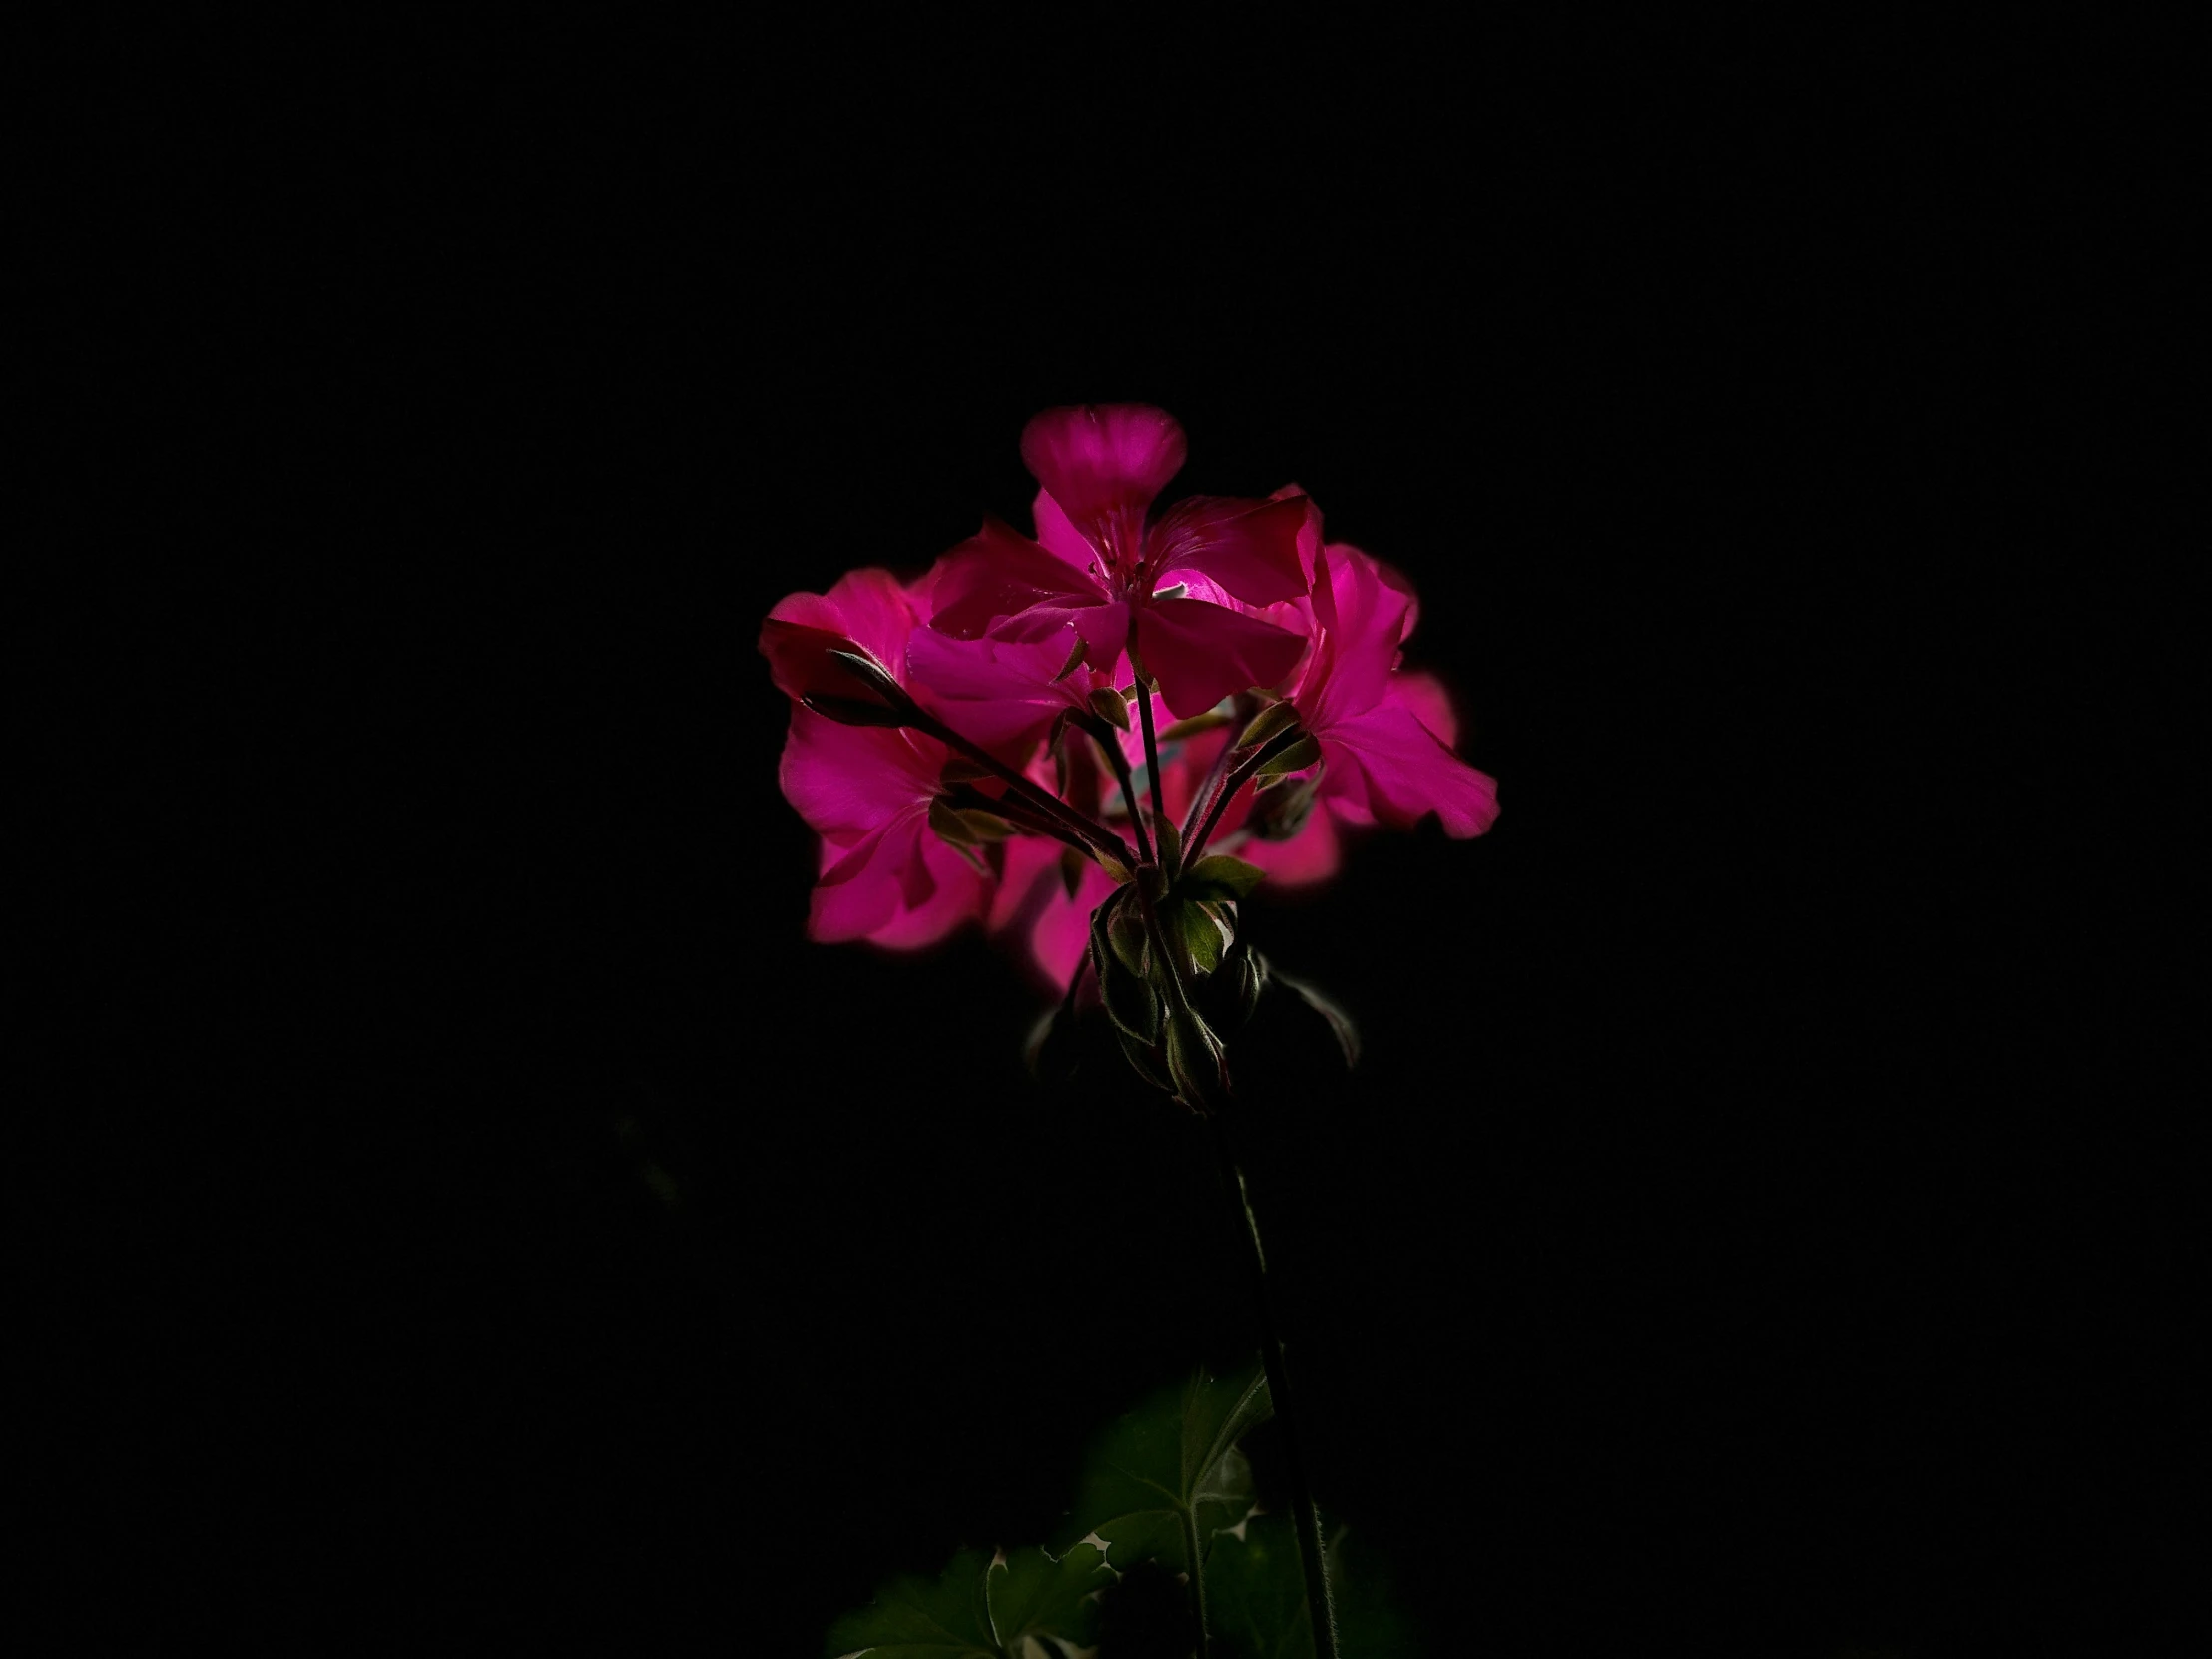 pink flowers against a black background in the dark